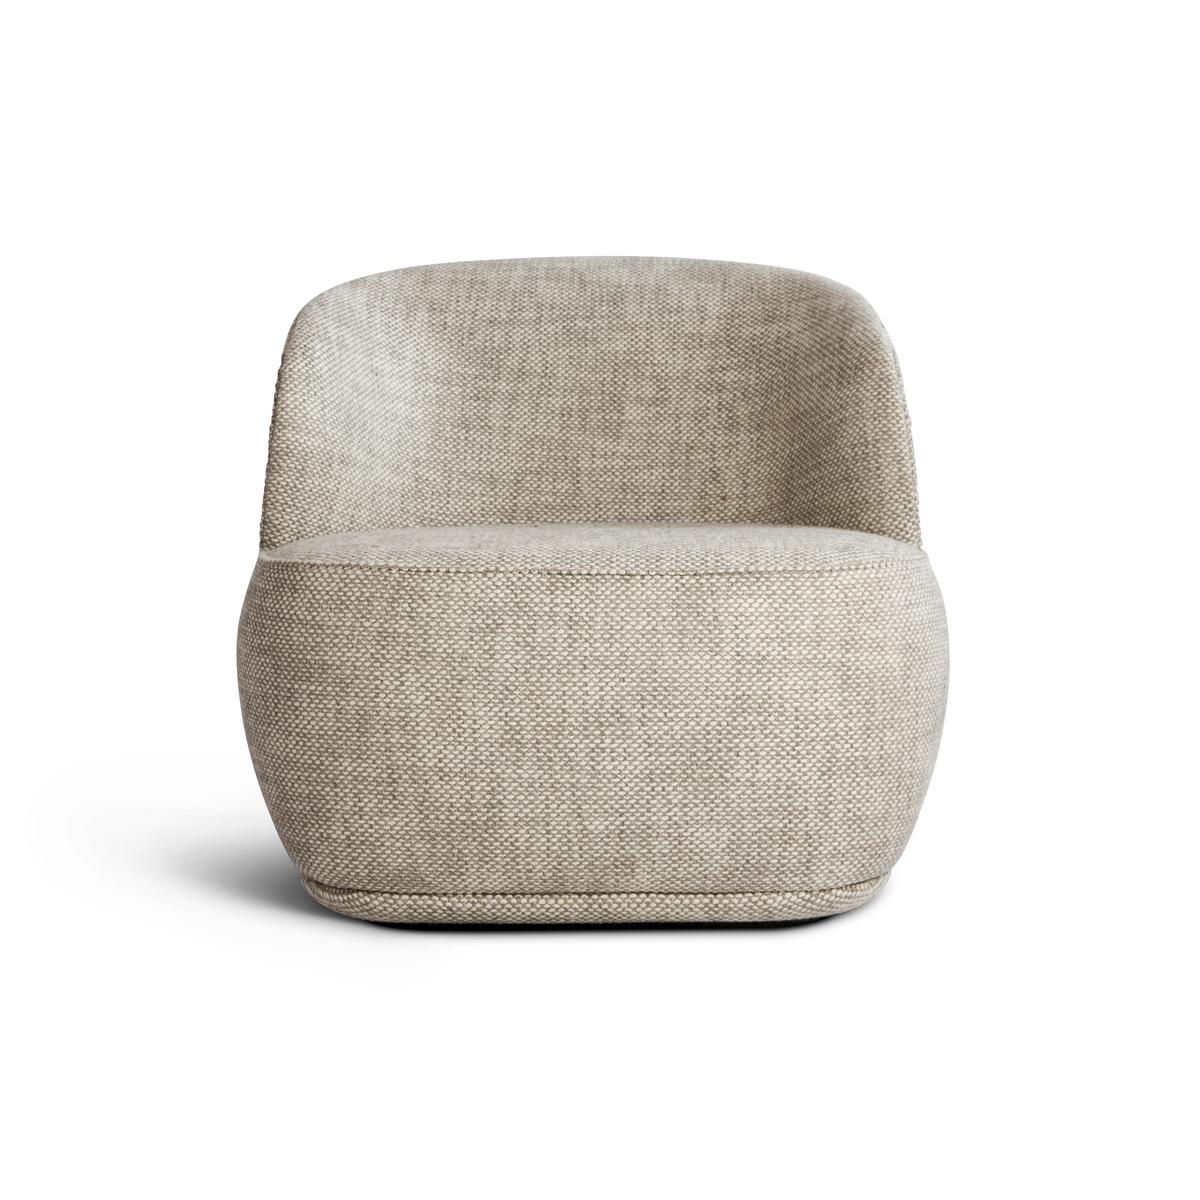 La pipe lounge - Armchair 
Design: Friends & Founders

Available with fixed base or return swivel
Upholstery available in a wide range of fabrics and leathers (contact us!)
Model shown (fabric): Dedar, Xylophone 002

Price may vary depending